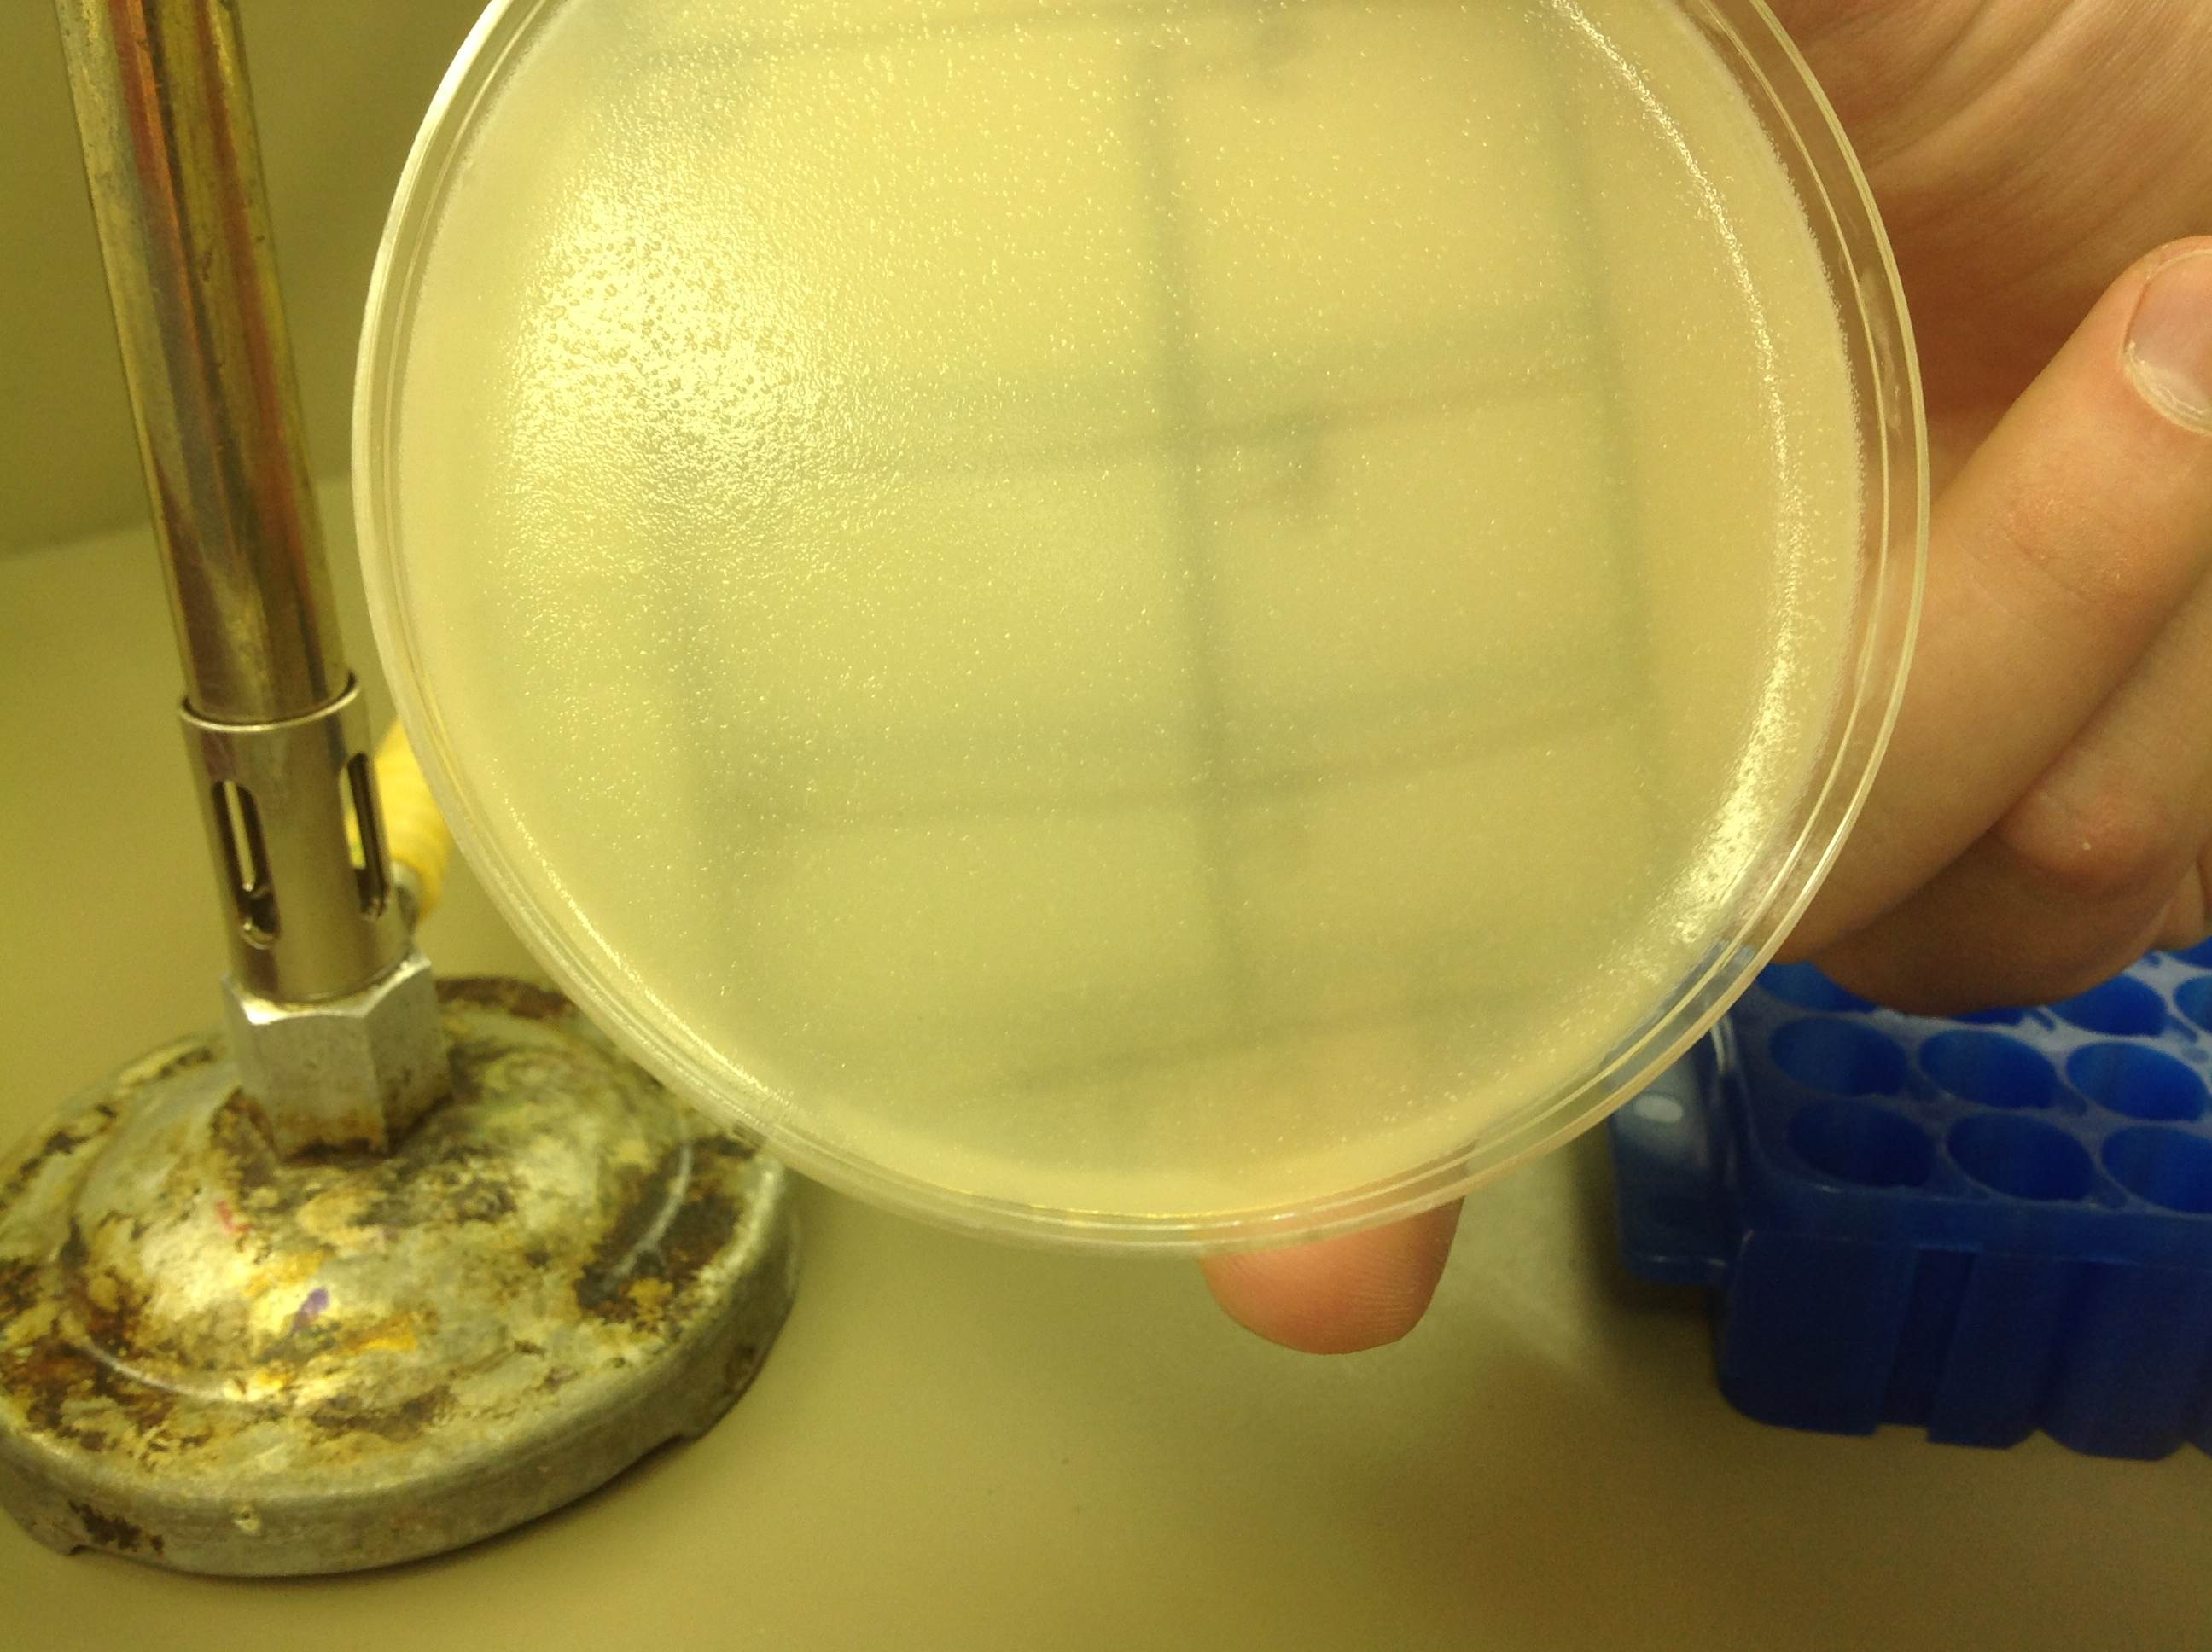 A no phage plaques were found on this sample.